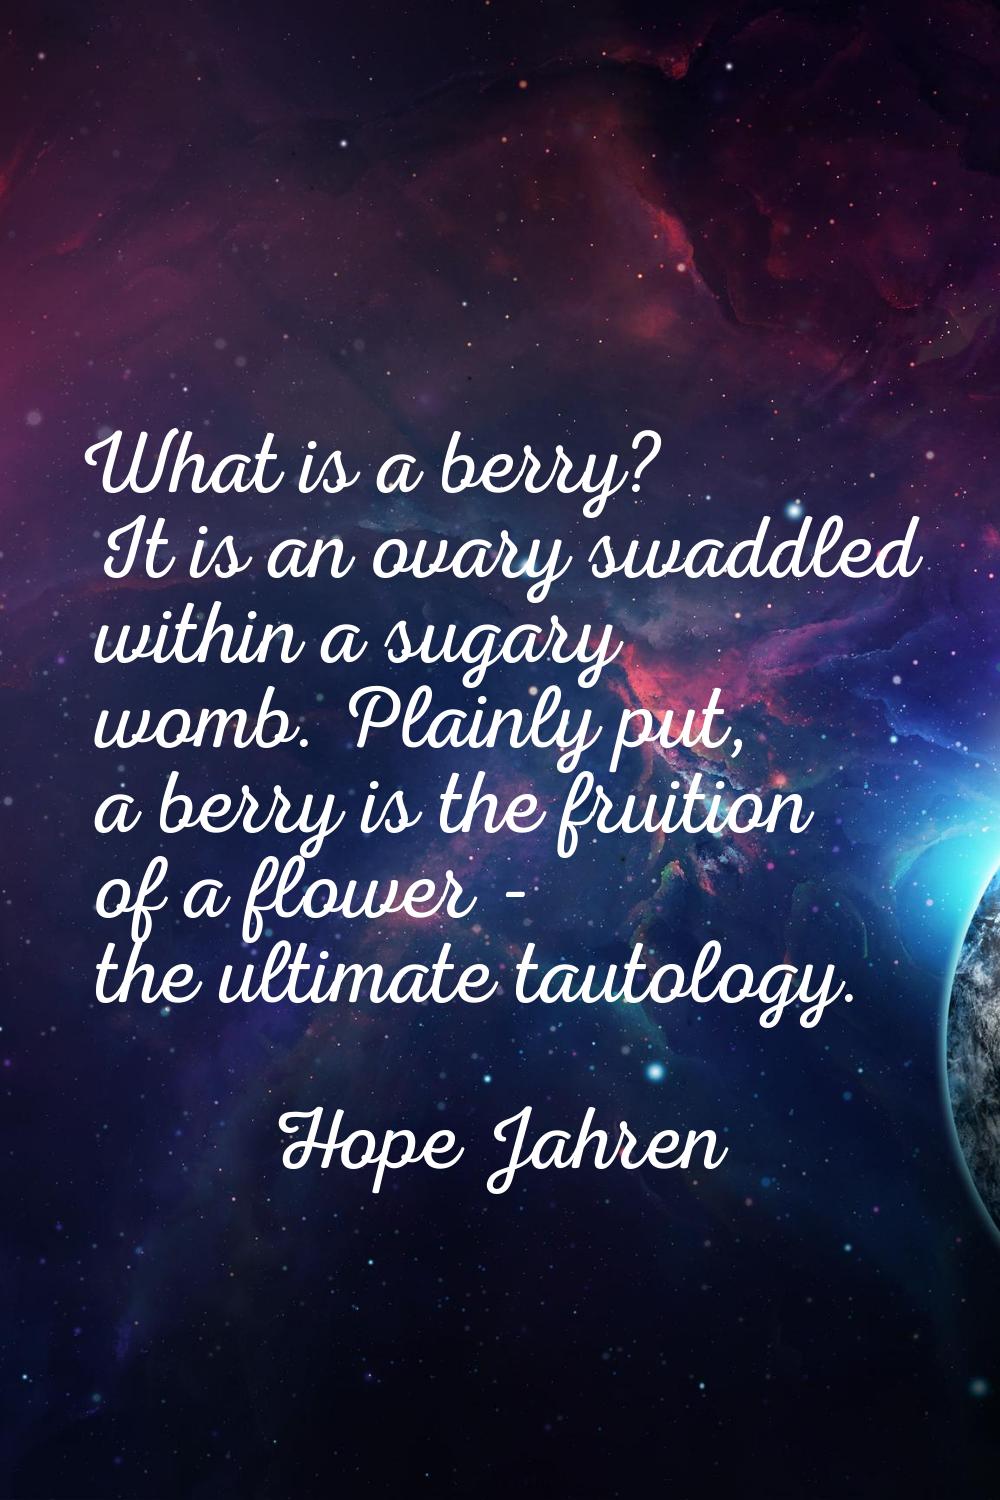 What is a berry? It is an ovary swaddled within a sugary womb. Plainly put, a berry is the fruition